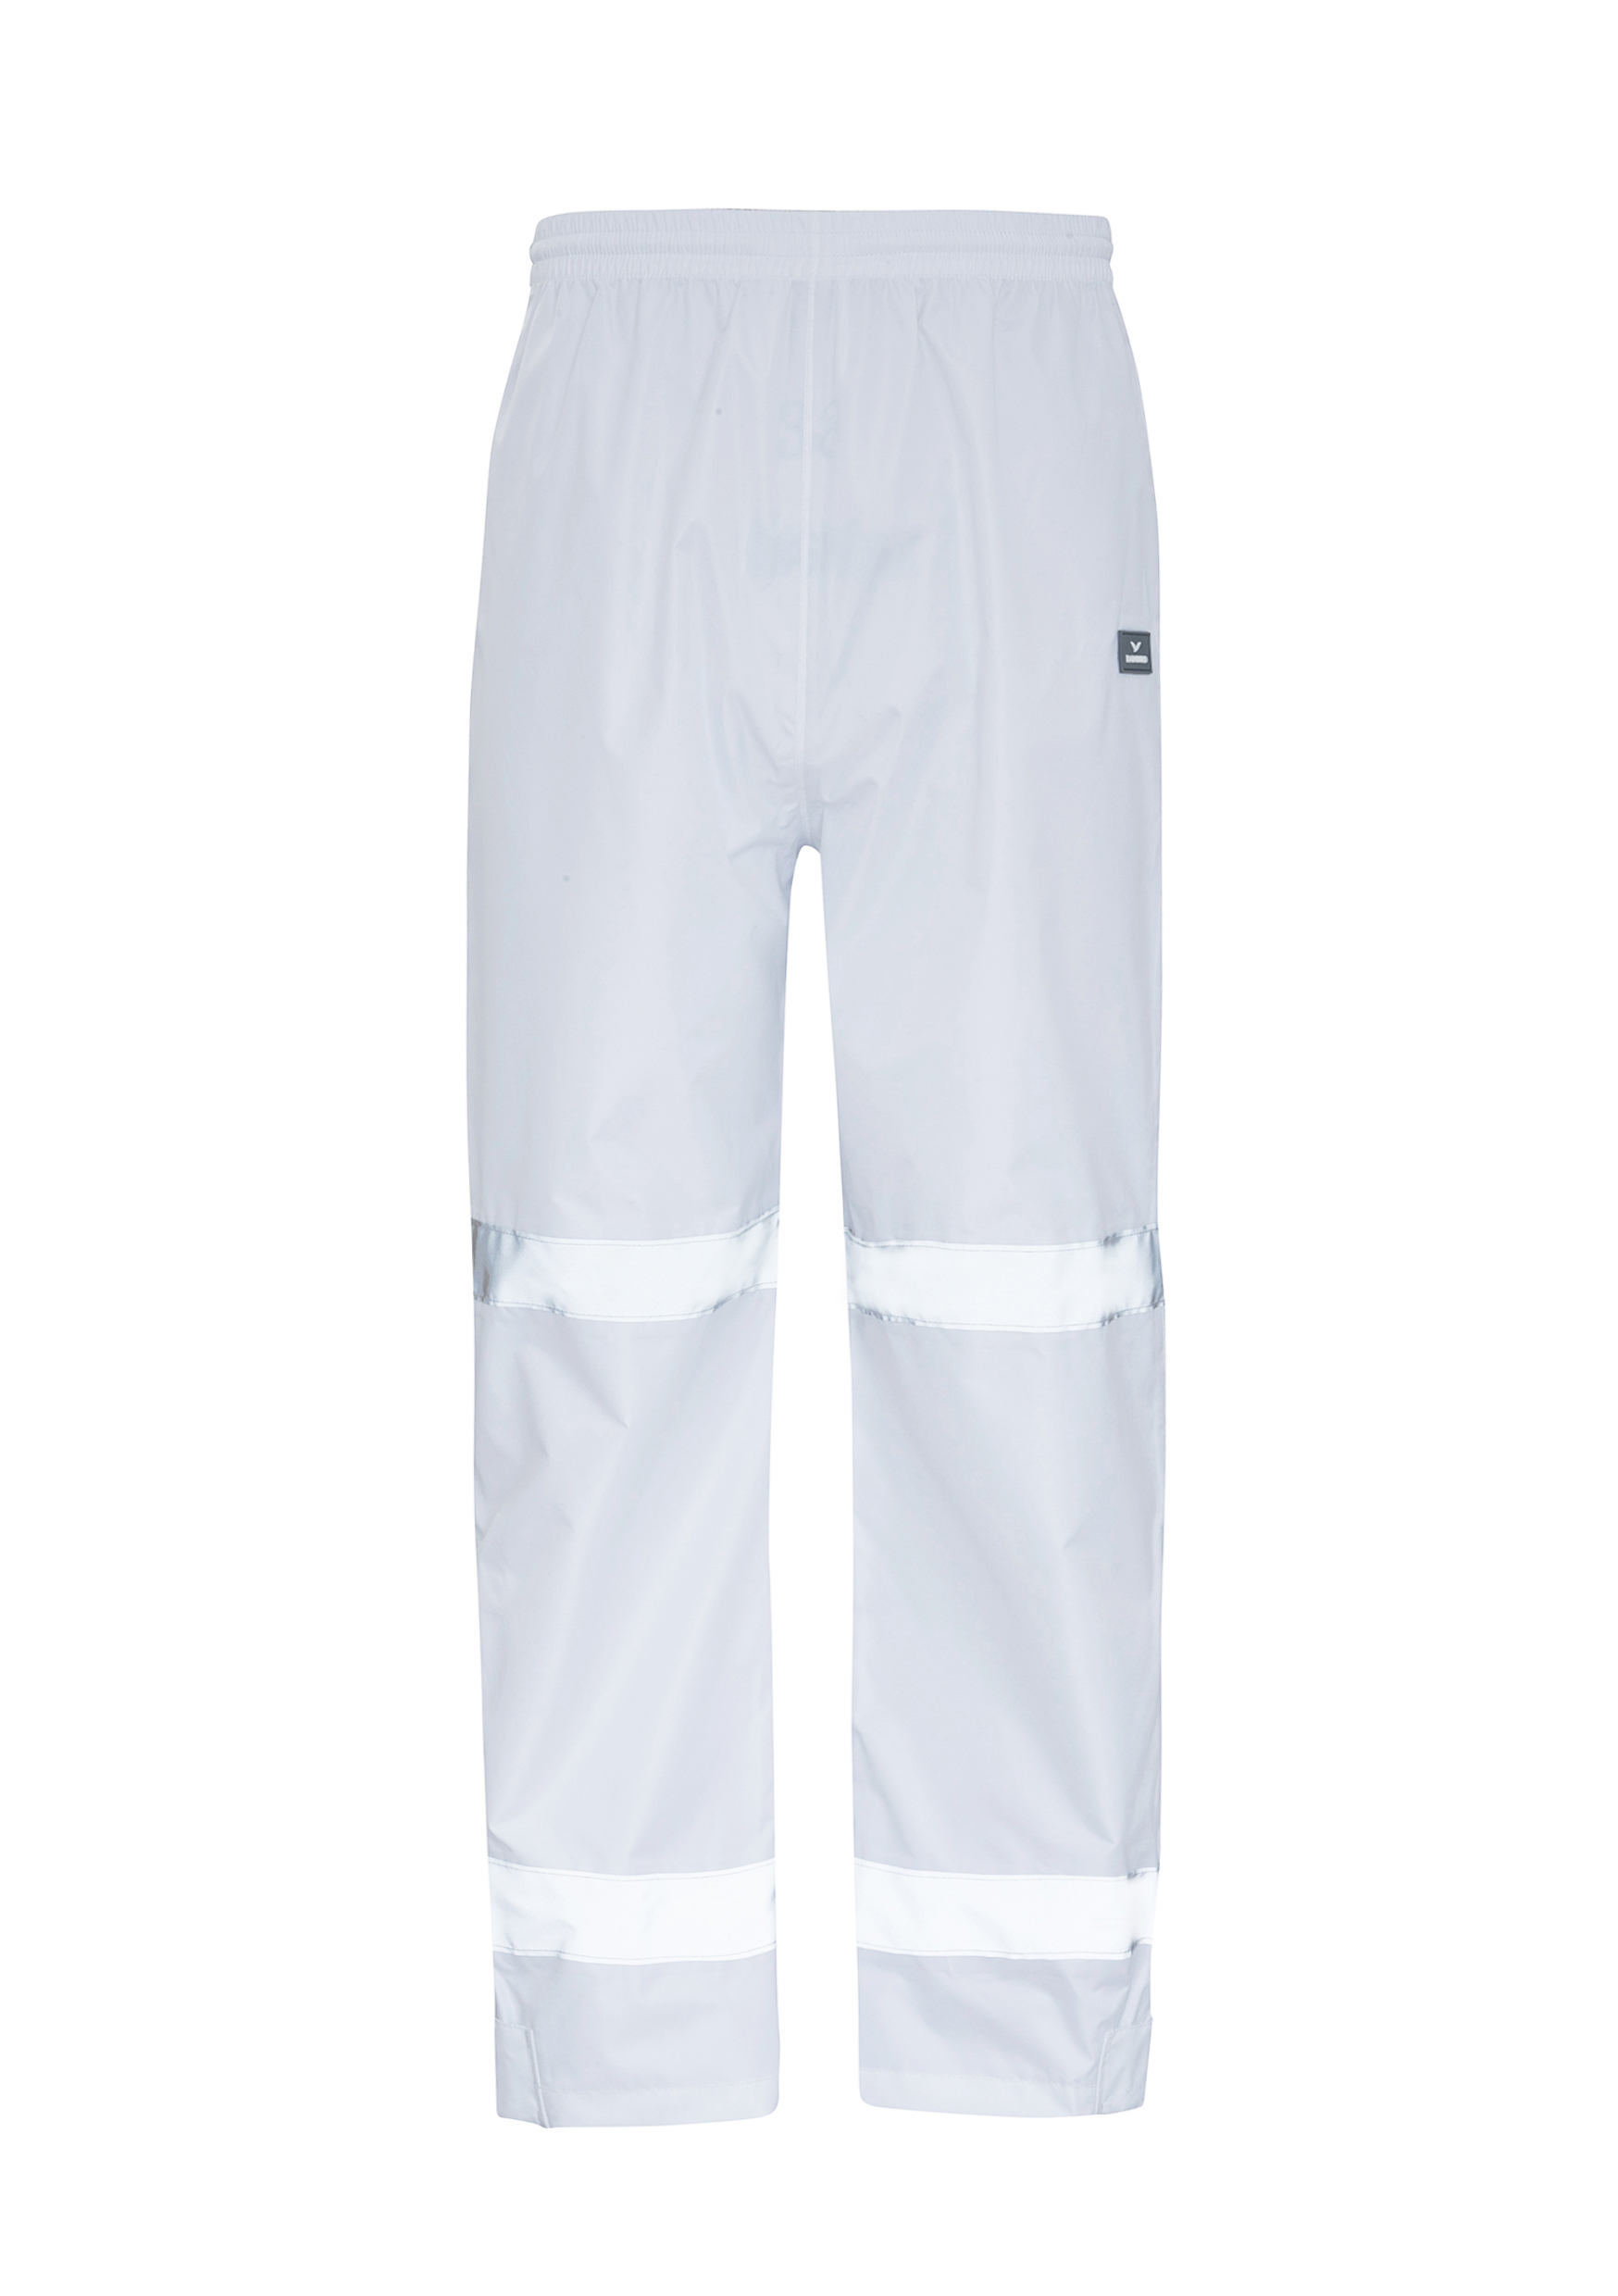 NIGHT VIS OVERPANT TAPED WHITE 2XL -WATER/WINDPROOF